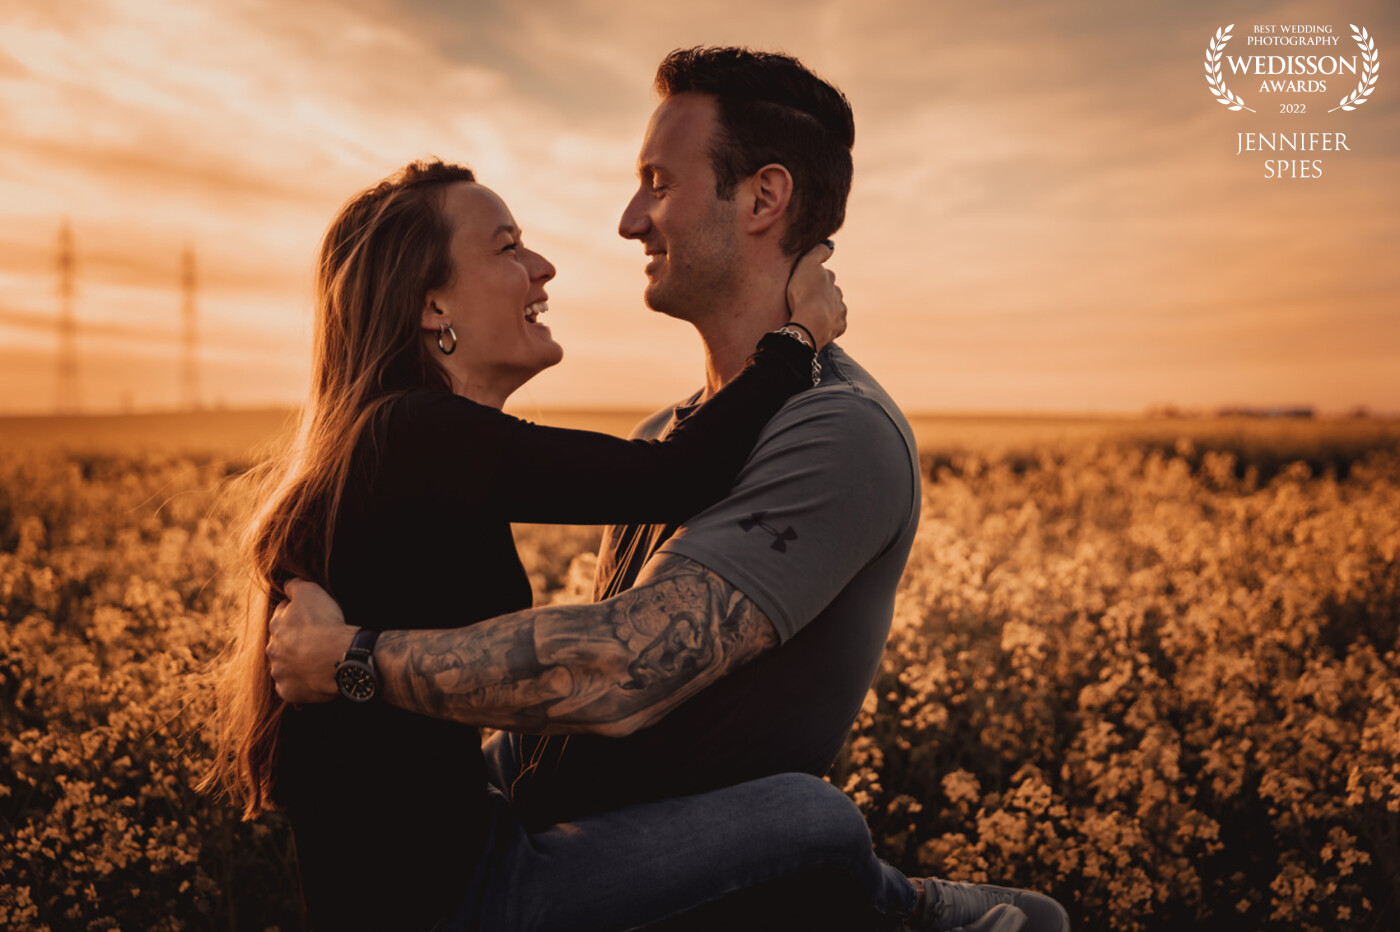 Romantic couple shooting at sunset in the glowing rapeseed field. We love capturing those special moments with the perfect backdrop and beautiful golden light.